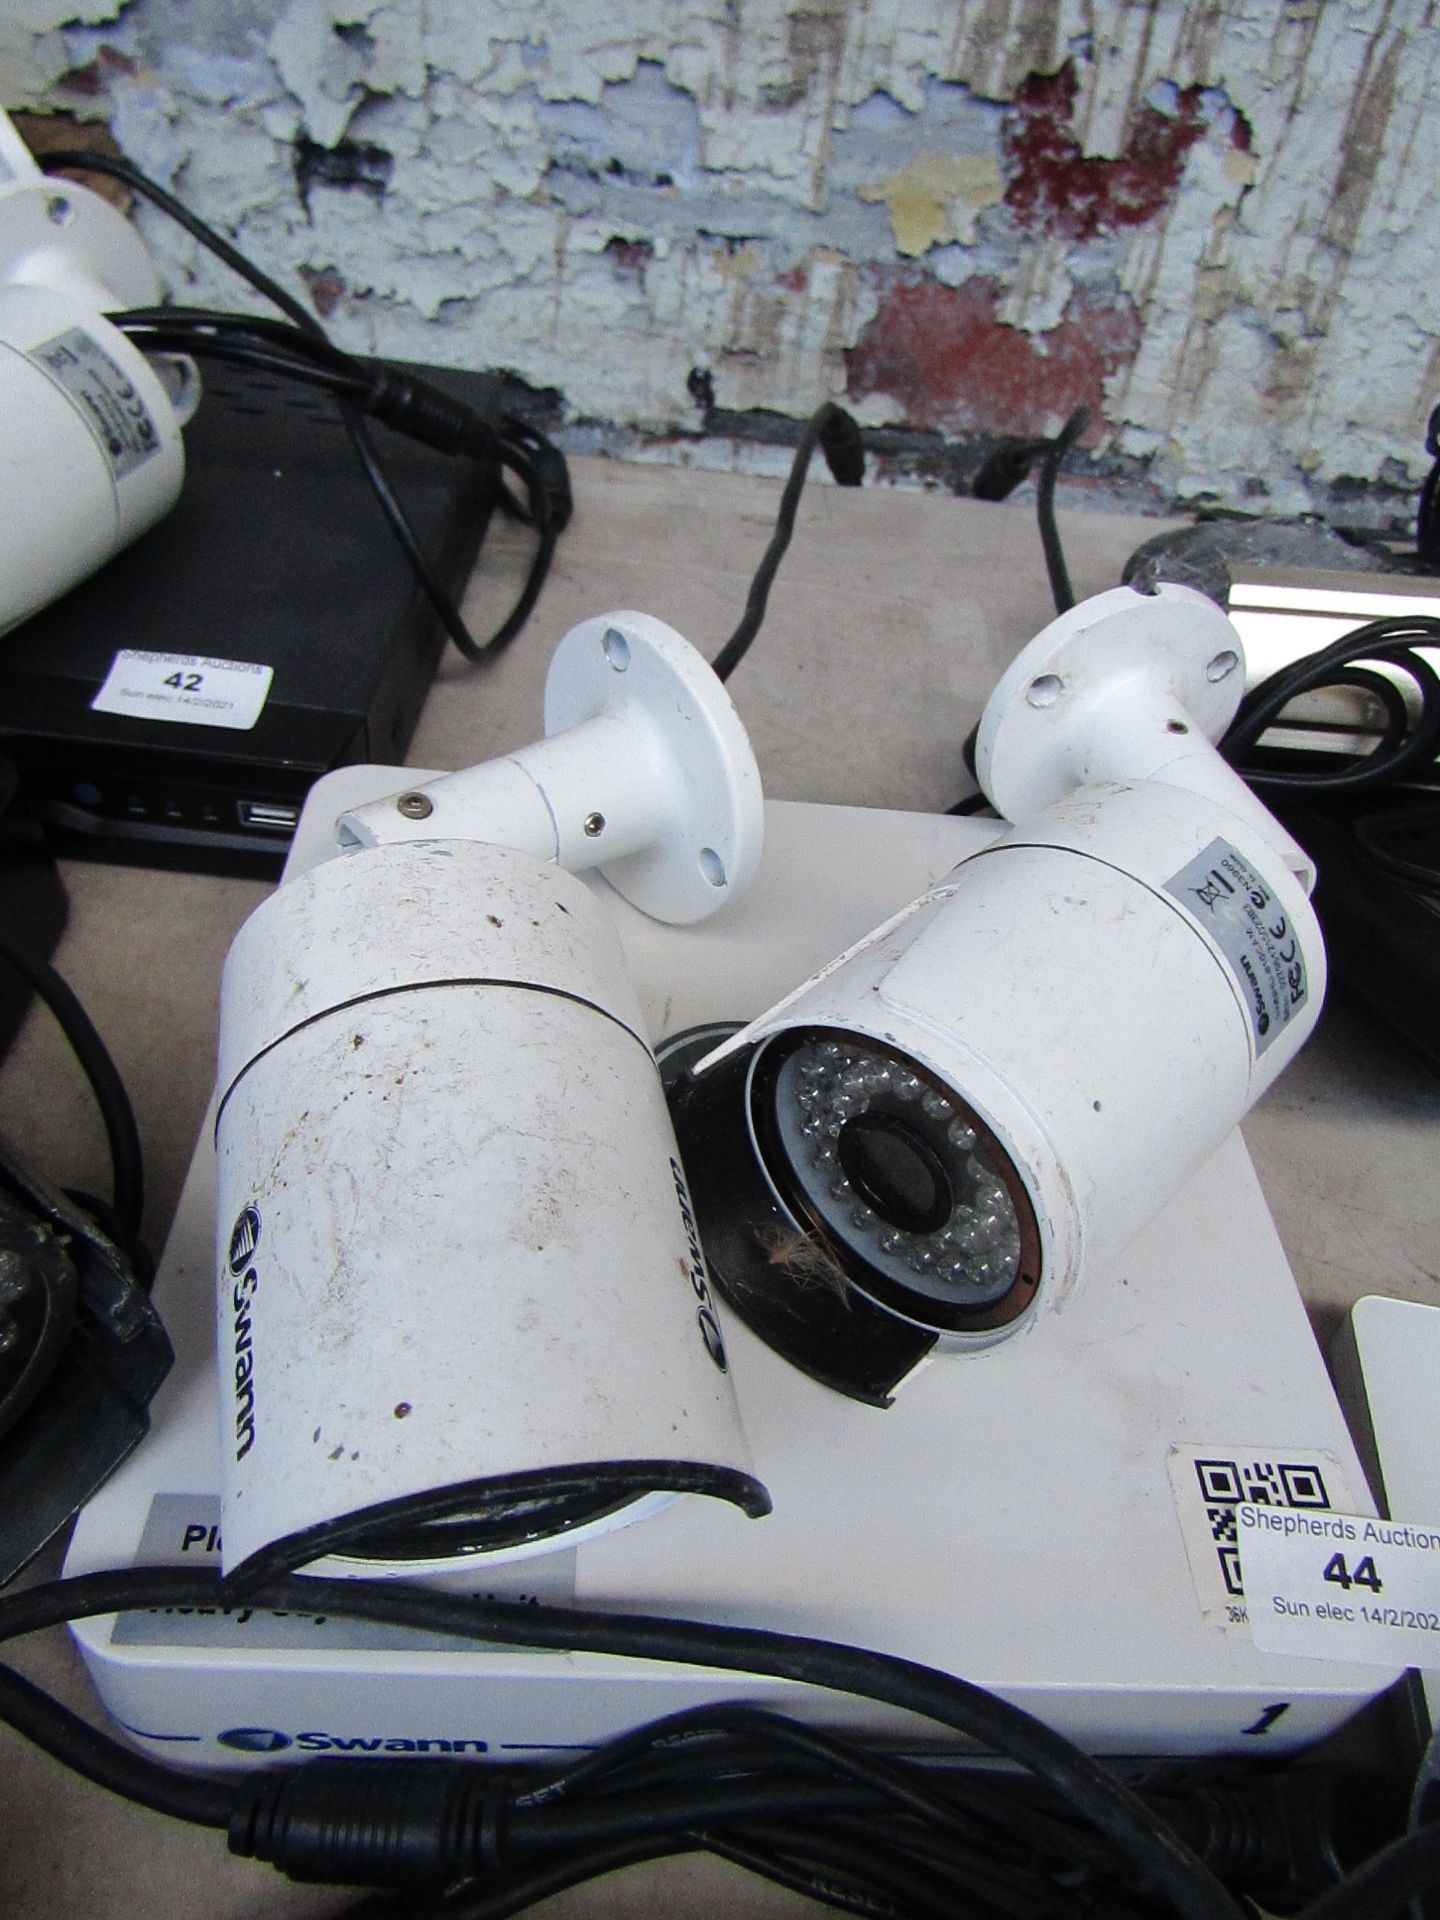 Swann NVR & 2x Swann cameras, All unchecked. Please note, this lot may be missing power cables,